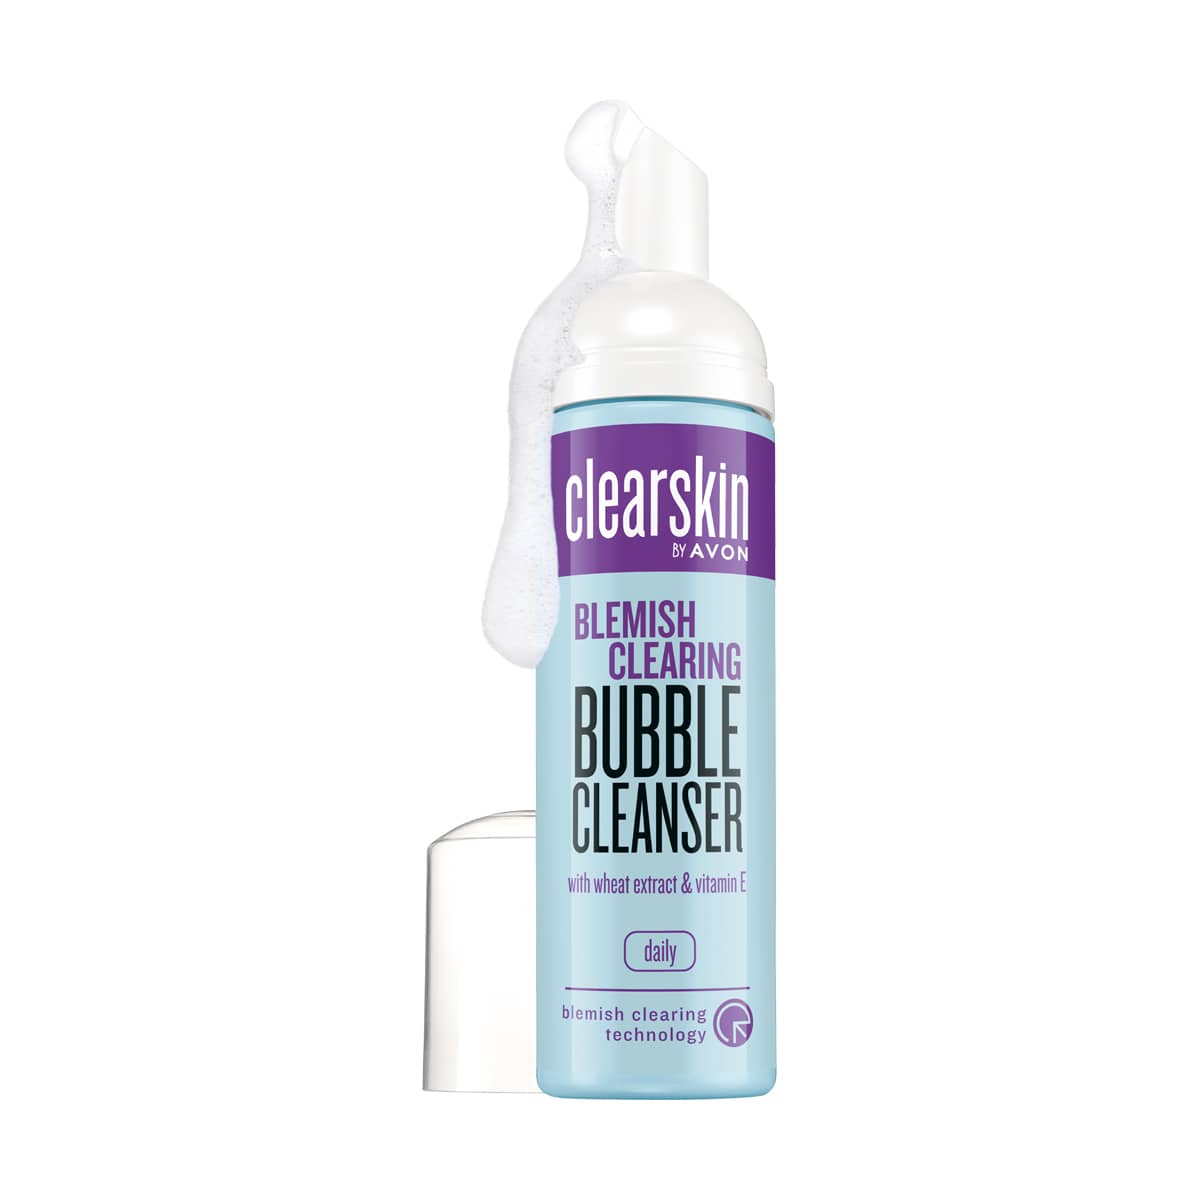 Clearskin Blemish Clearing Bubble Cleanser 150ml